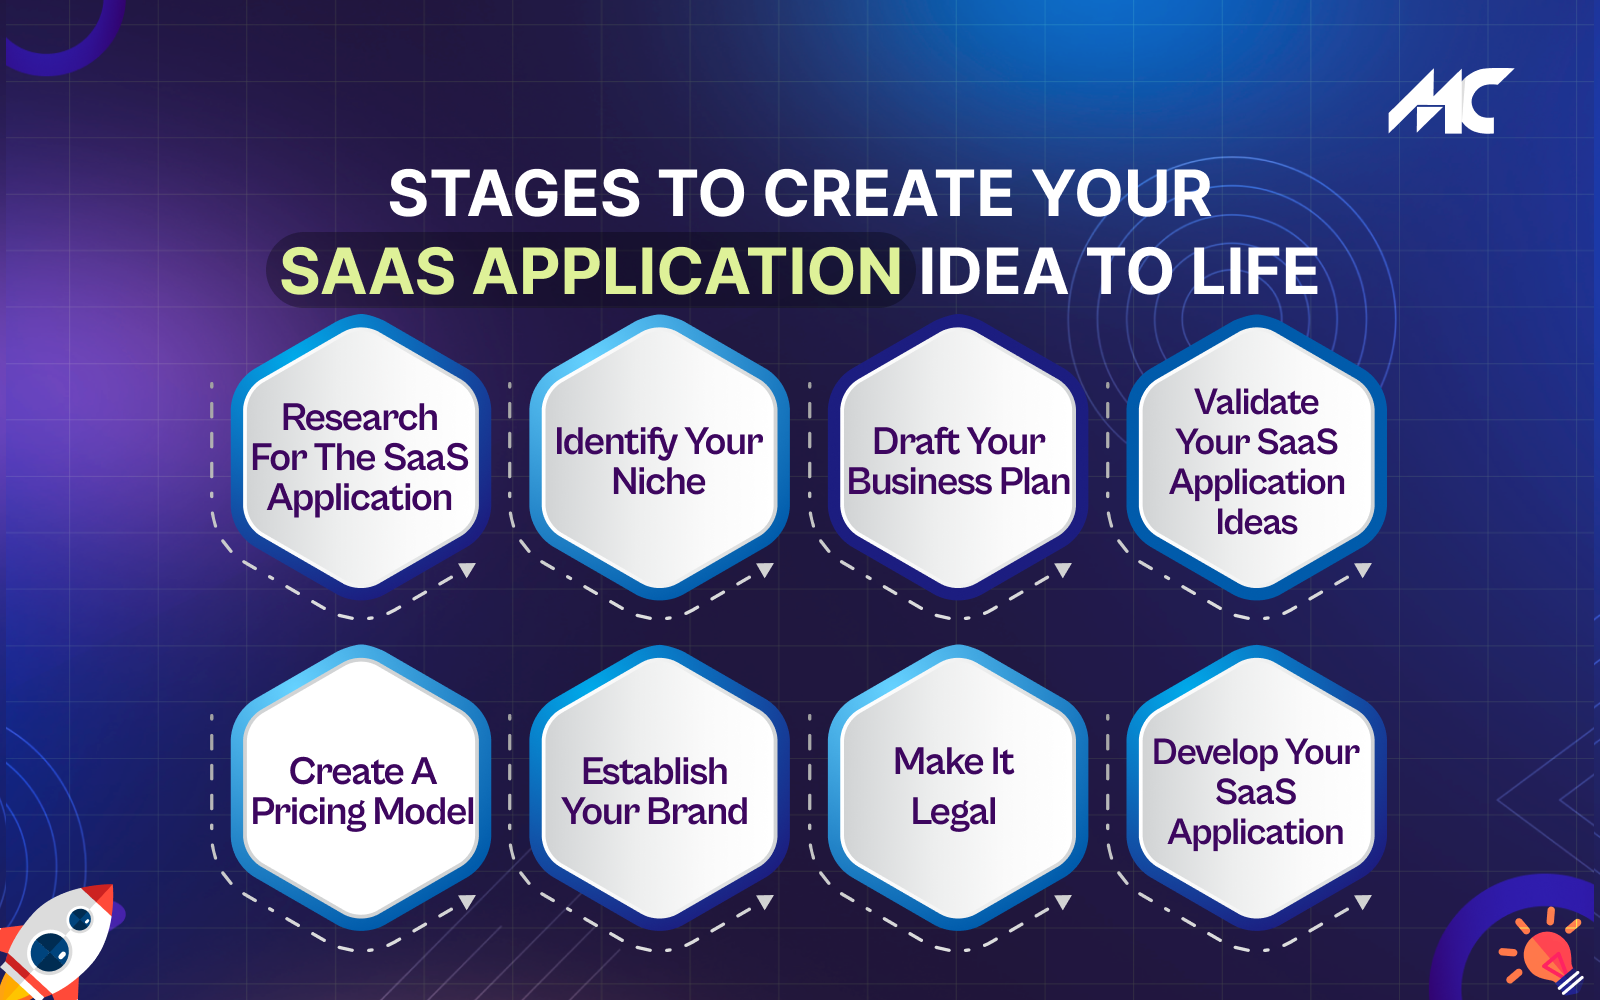 <img src="Stages to Create Your SaaS Application Idea to Life.png" alt="Stages to Create Your SaaS Application Idea to Life">